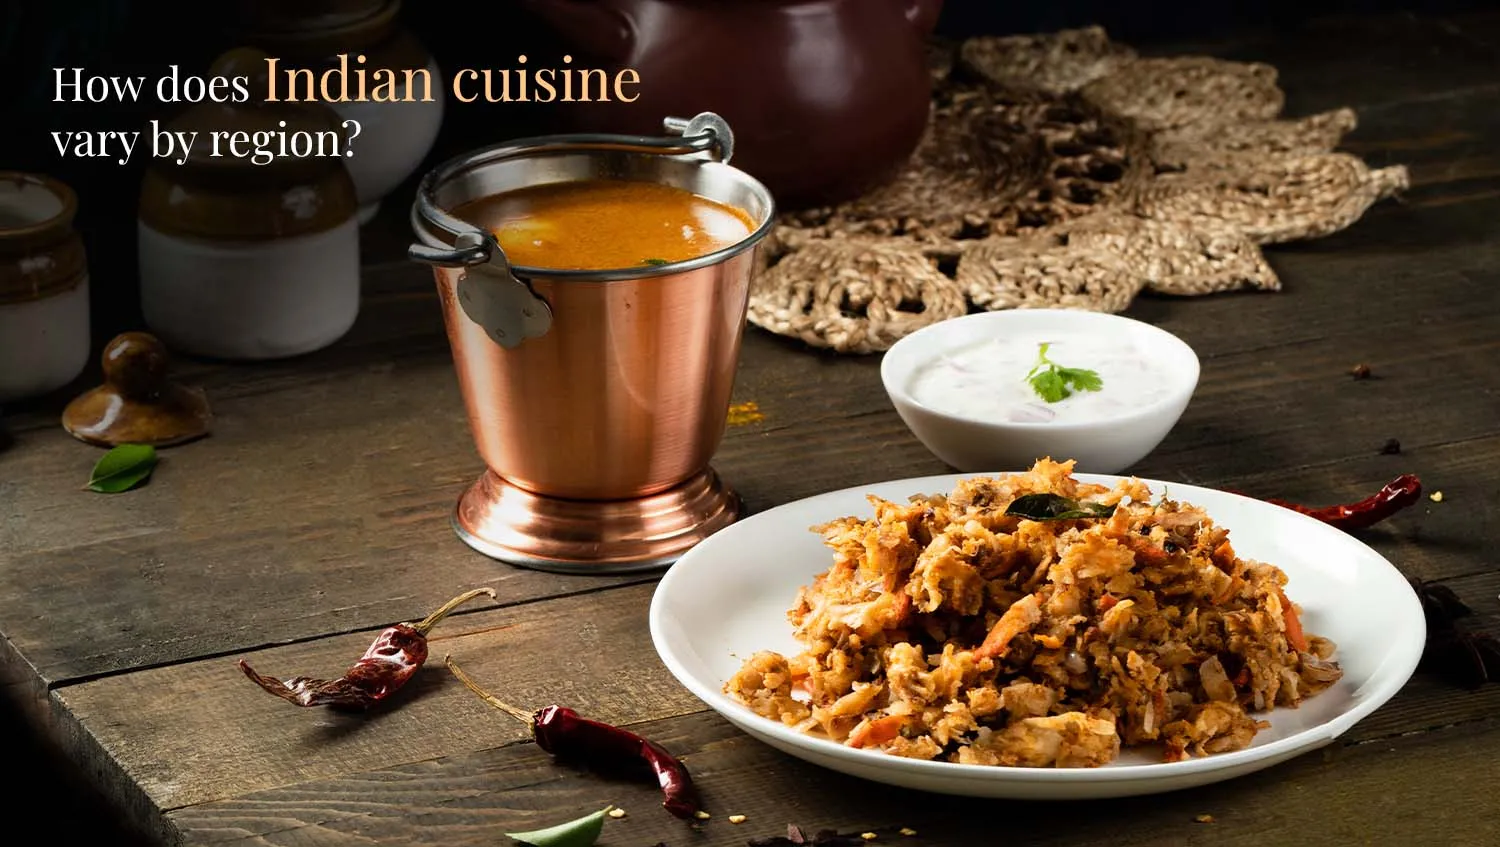 How does Indian cuisine vary by region